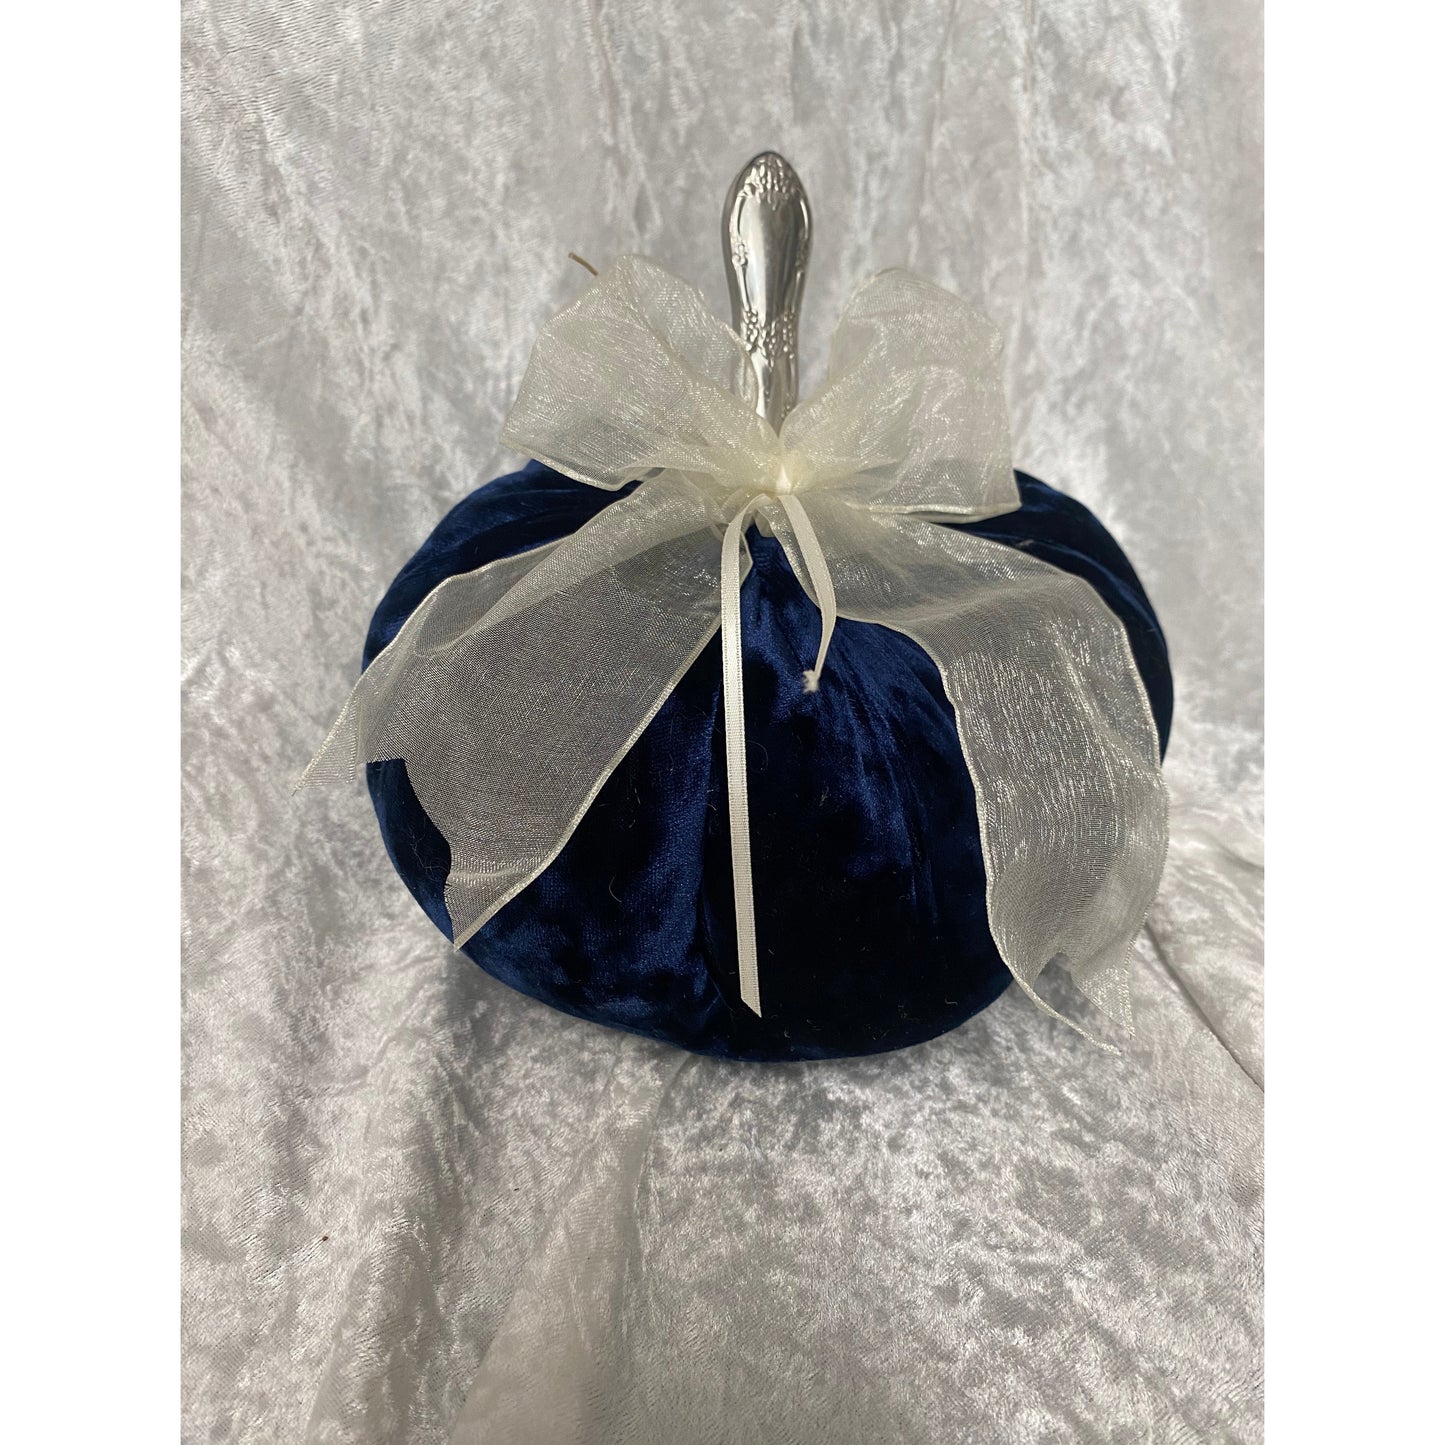 One of Kind Blue Velvet Pumpkin with White Bow Large